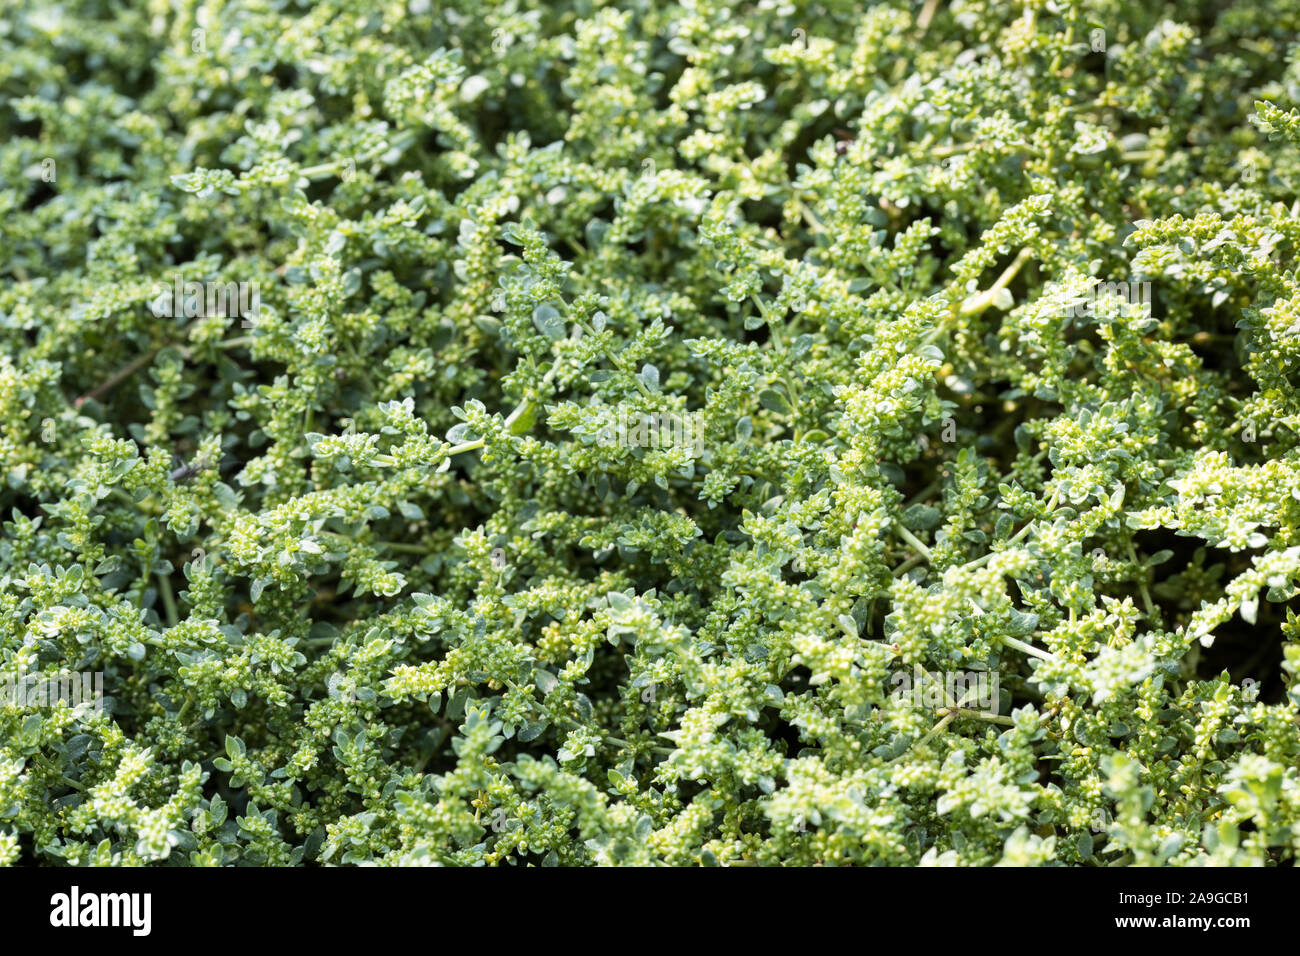 smooth rupturewort (Herniaria glabra) -  herniarin containing plant fills the frame Stock Photo